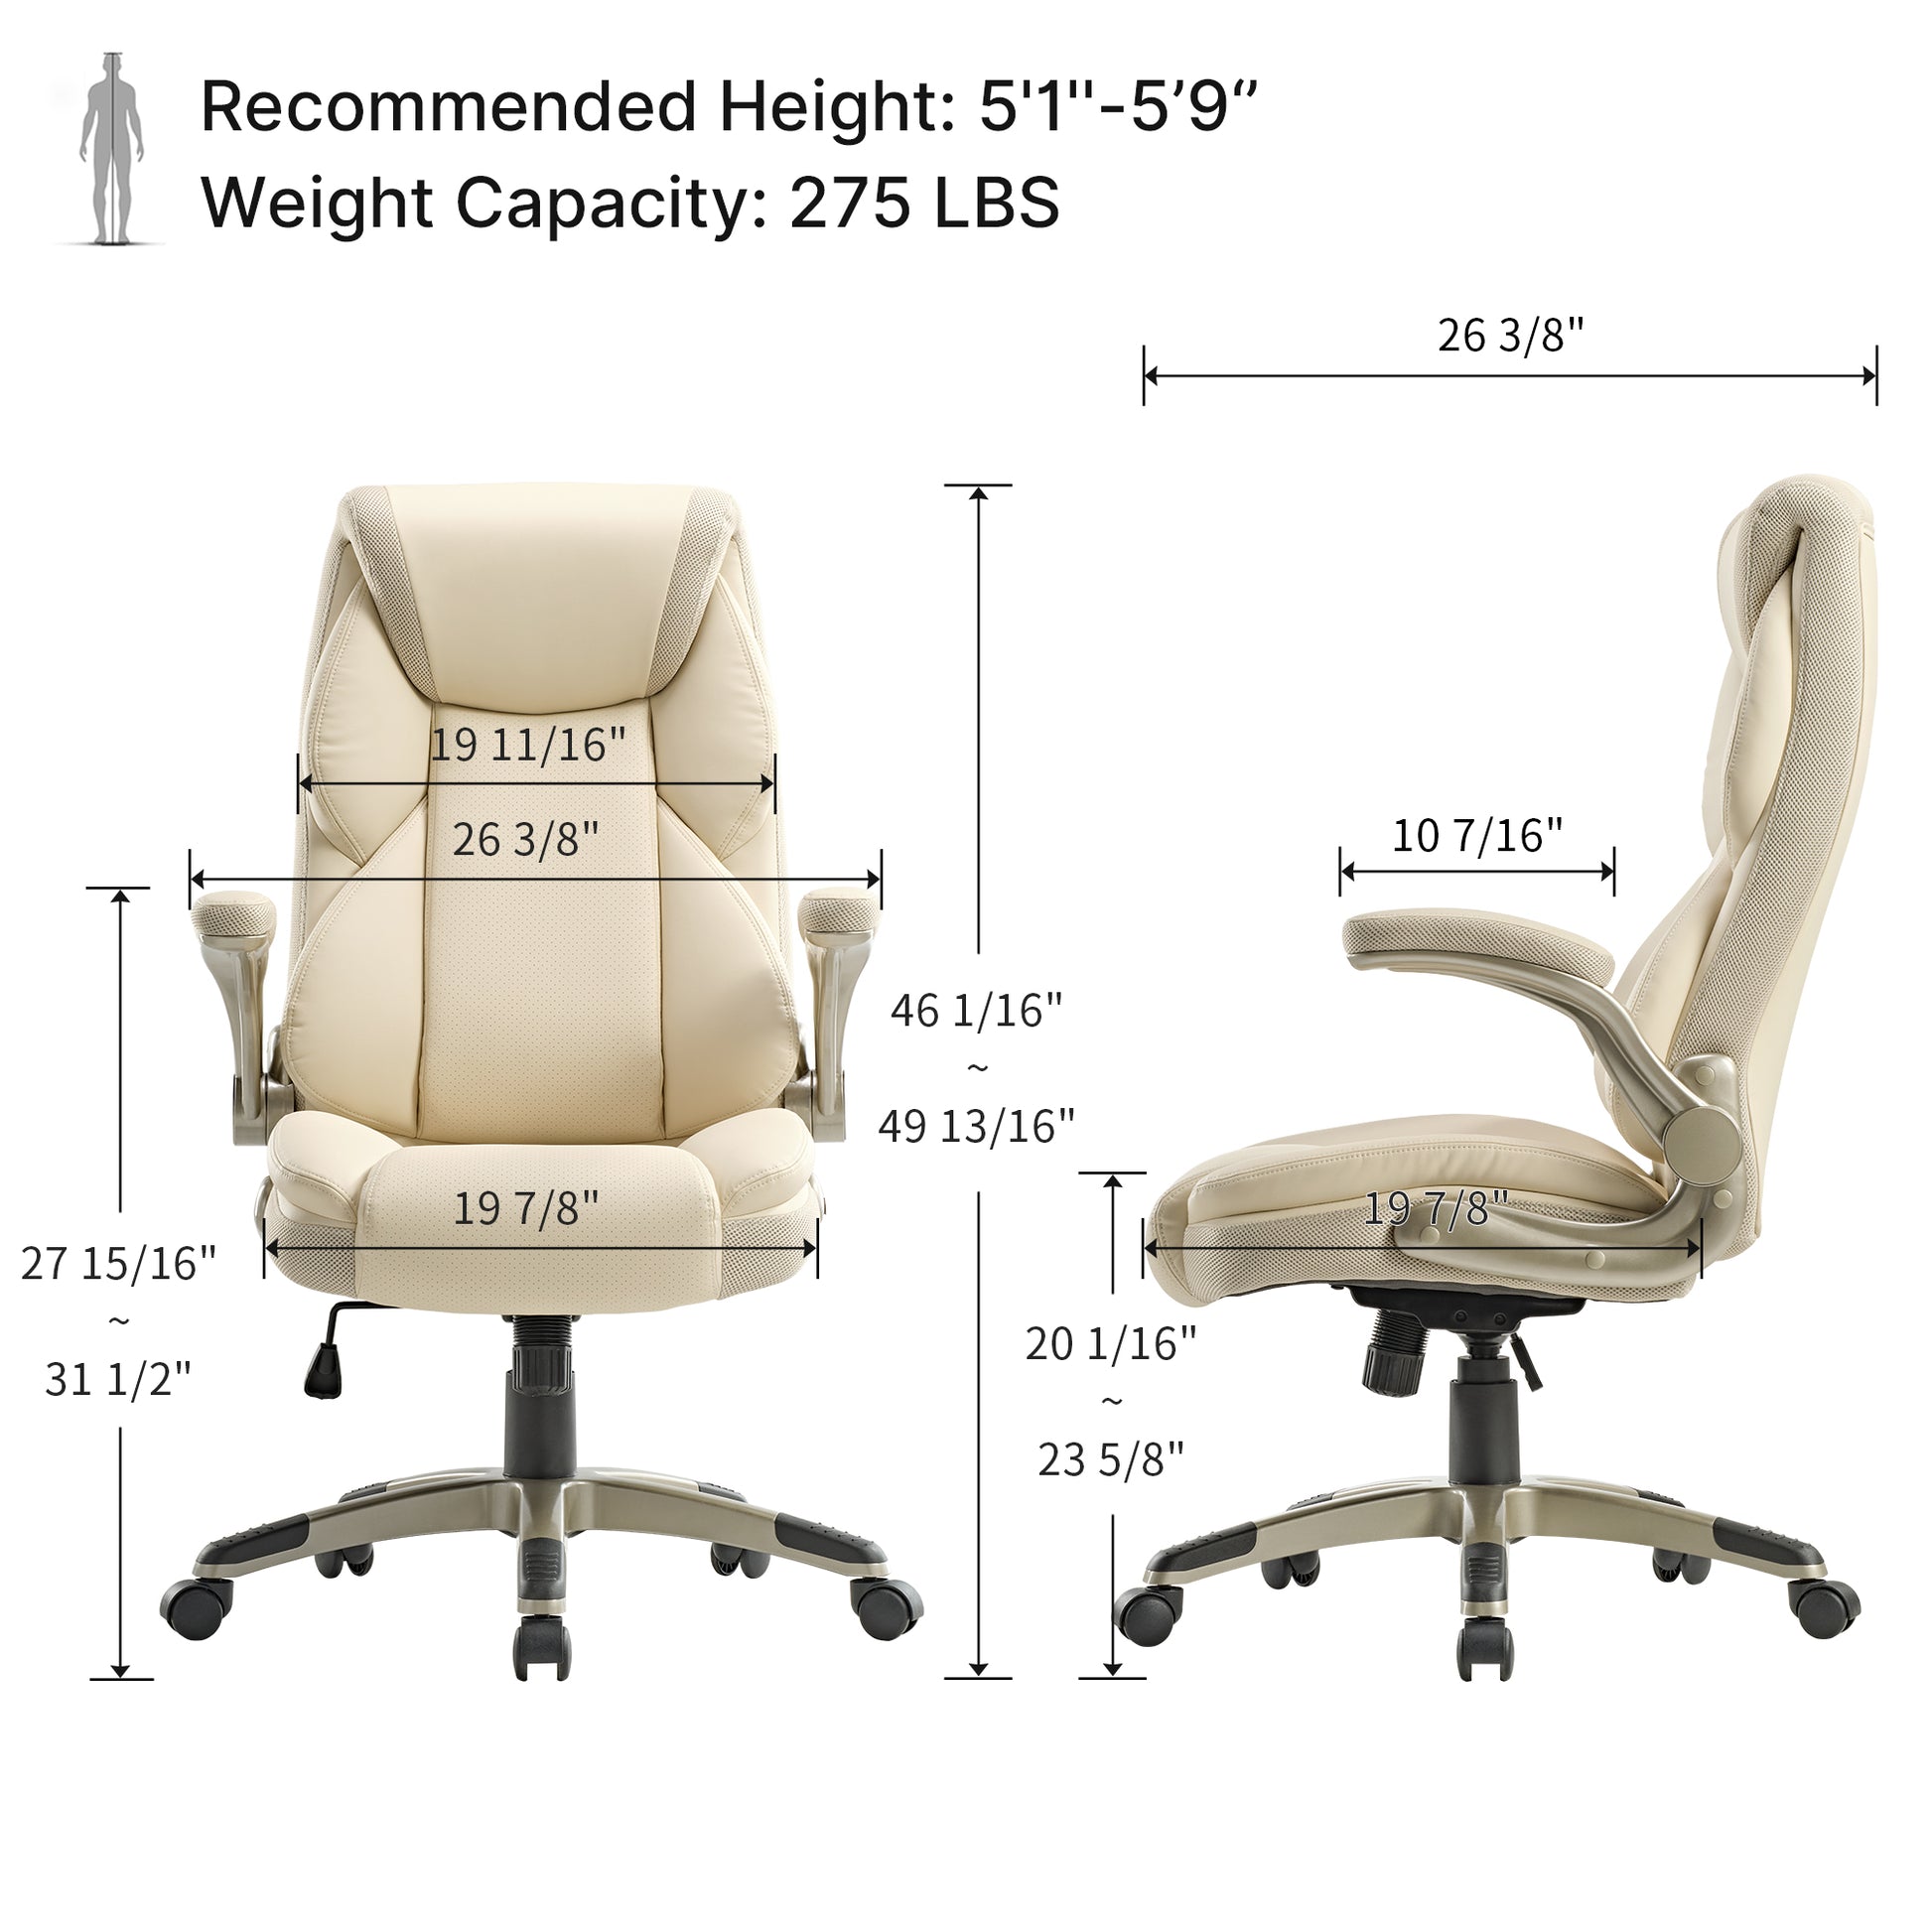 Galene, Home Office Chair, Off-White, product dimensions and specifications